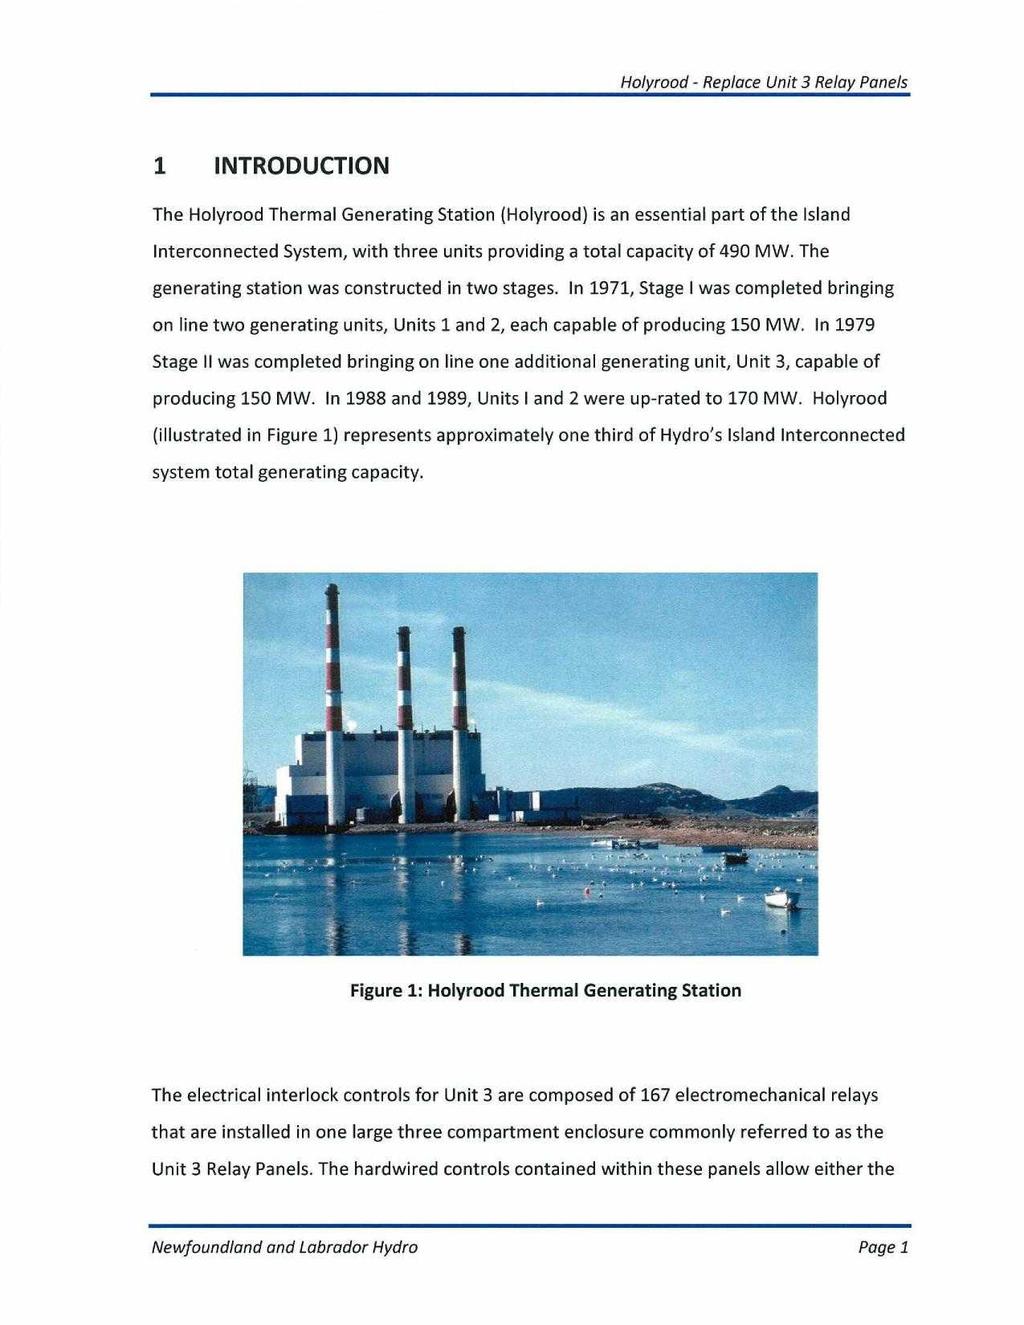 1 INTRODUCTION The Holyrood Thermal Generating Station (Holyrood) is an essential part of the Island Interconnected System, with three units providing a total capacity of 490 MW.